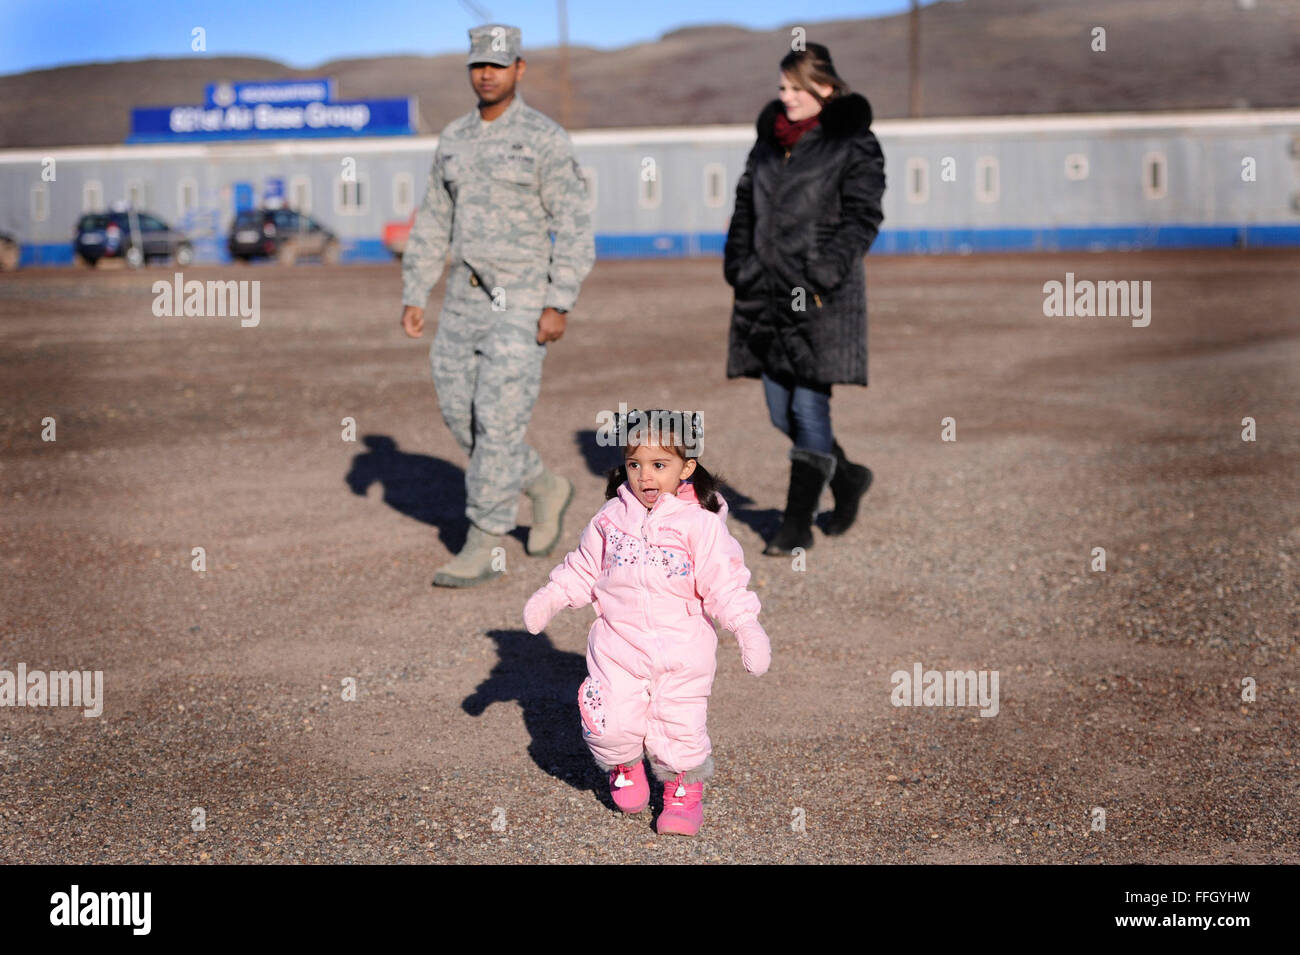 Staff Sgt. Siddharth Sunny, his wife, Shauna, and their daughter, Clara, take a walk at Thule AB. Although a visiting dependent is not rare, Clara is believed to be the youngest dependent to visit the base. Stock Photo